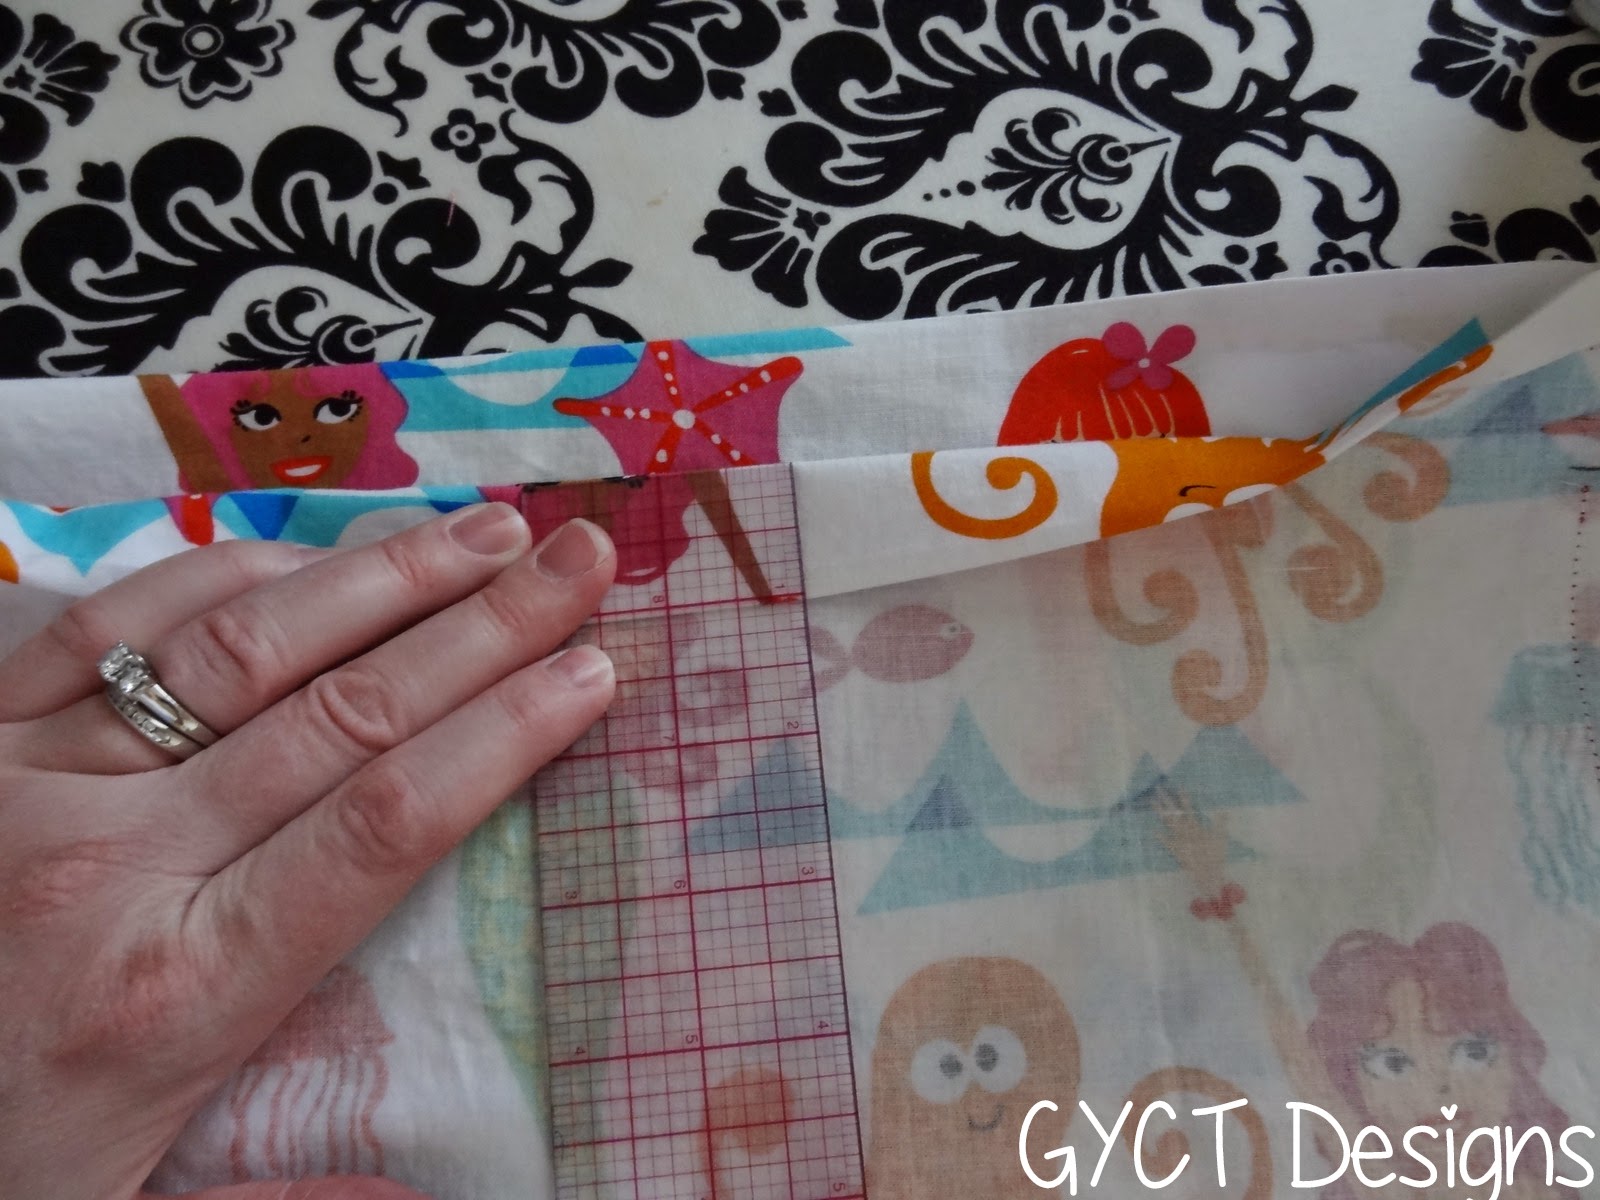 how to sew a drawstring bag